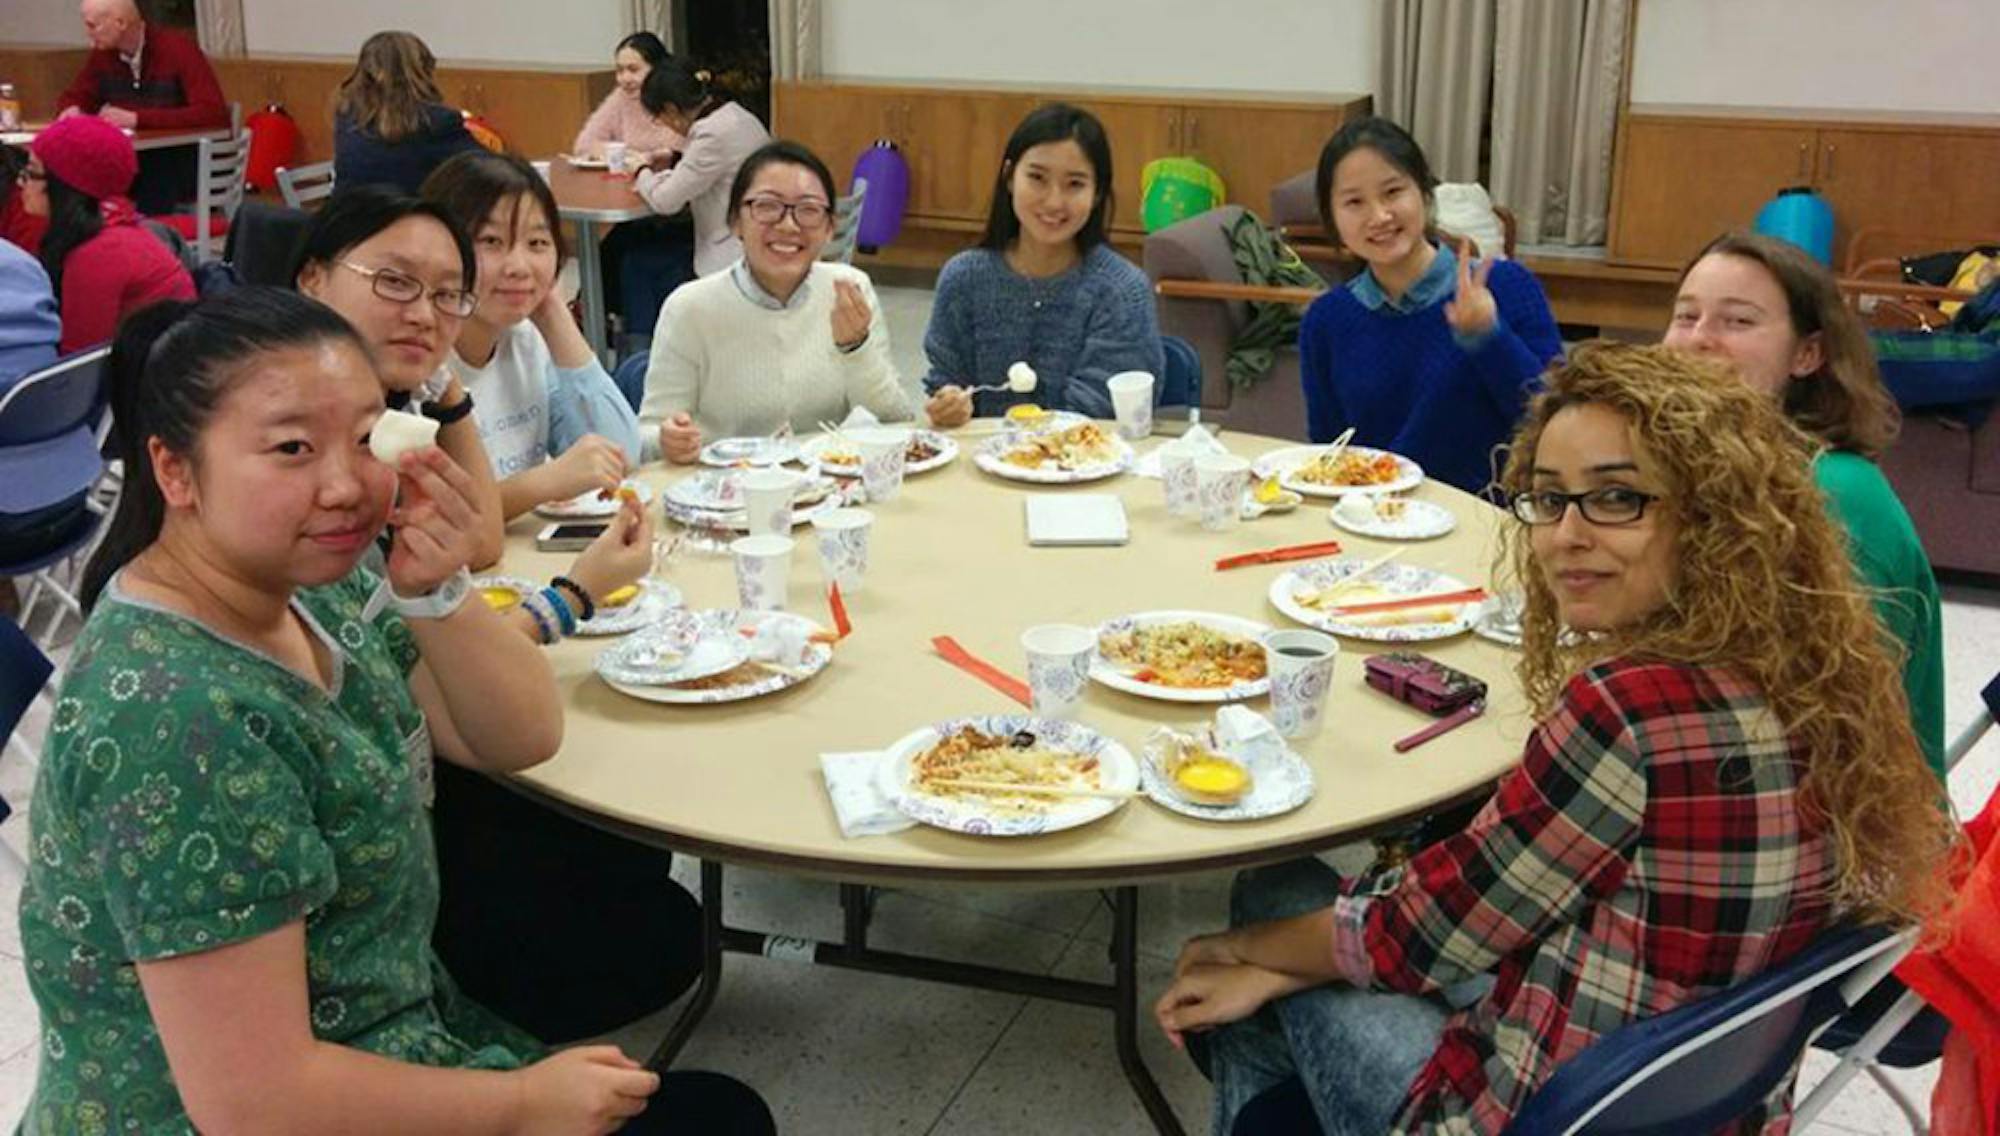 Saint Mary's international students share food and friendship at the Chinese Diversity Dinner, which took place in November.